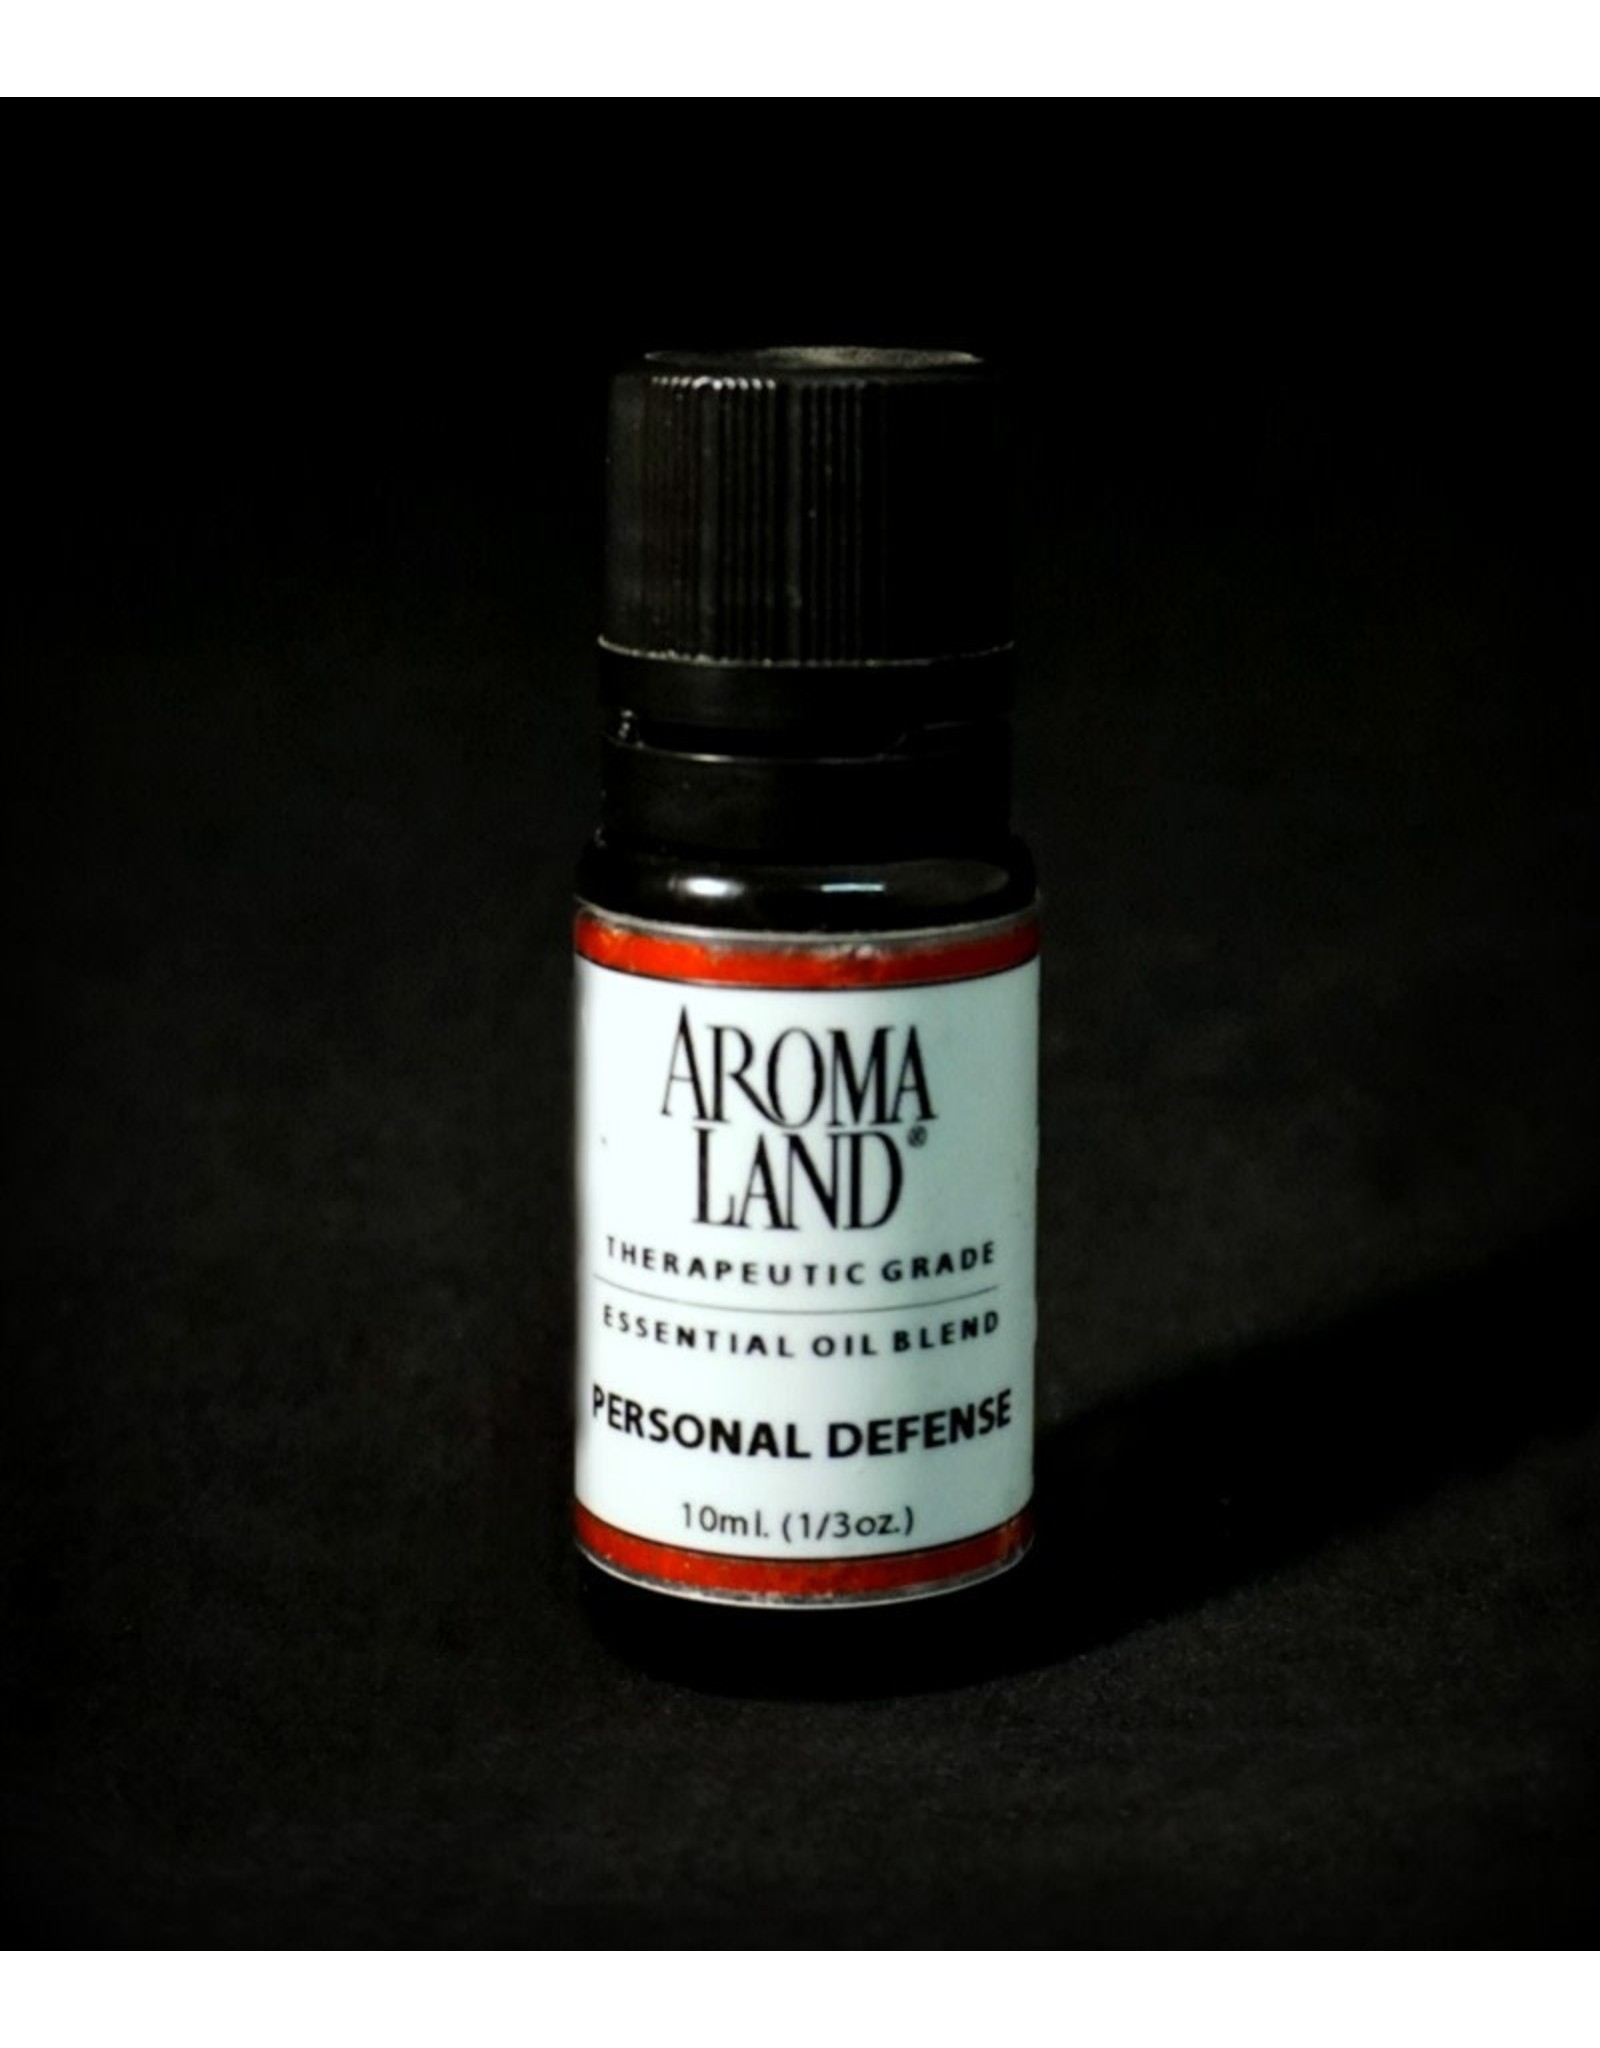 Aromaland Essential Oil Blend - Personal Defense